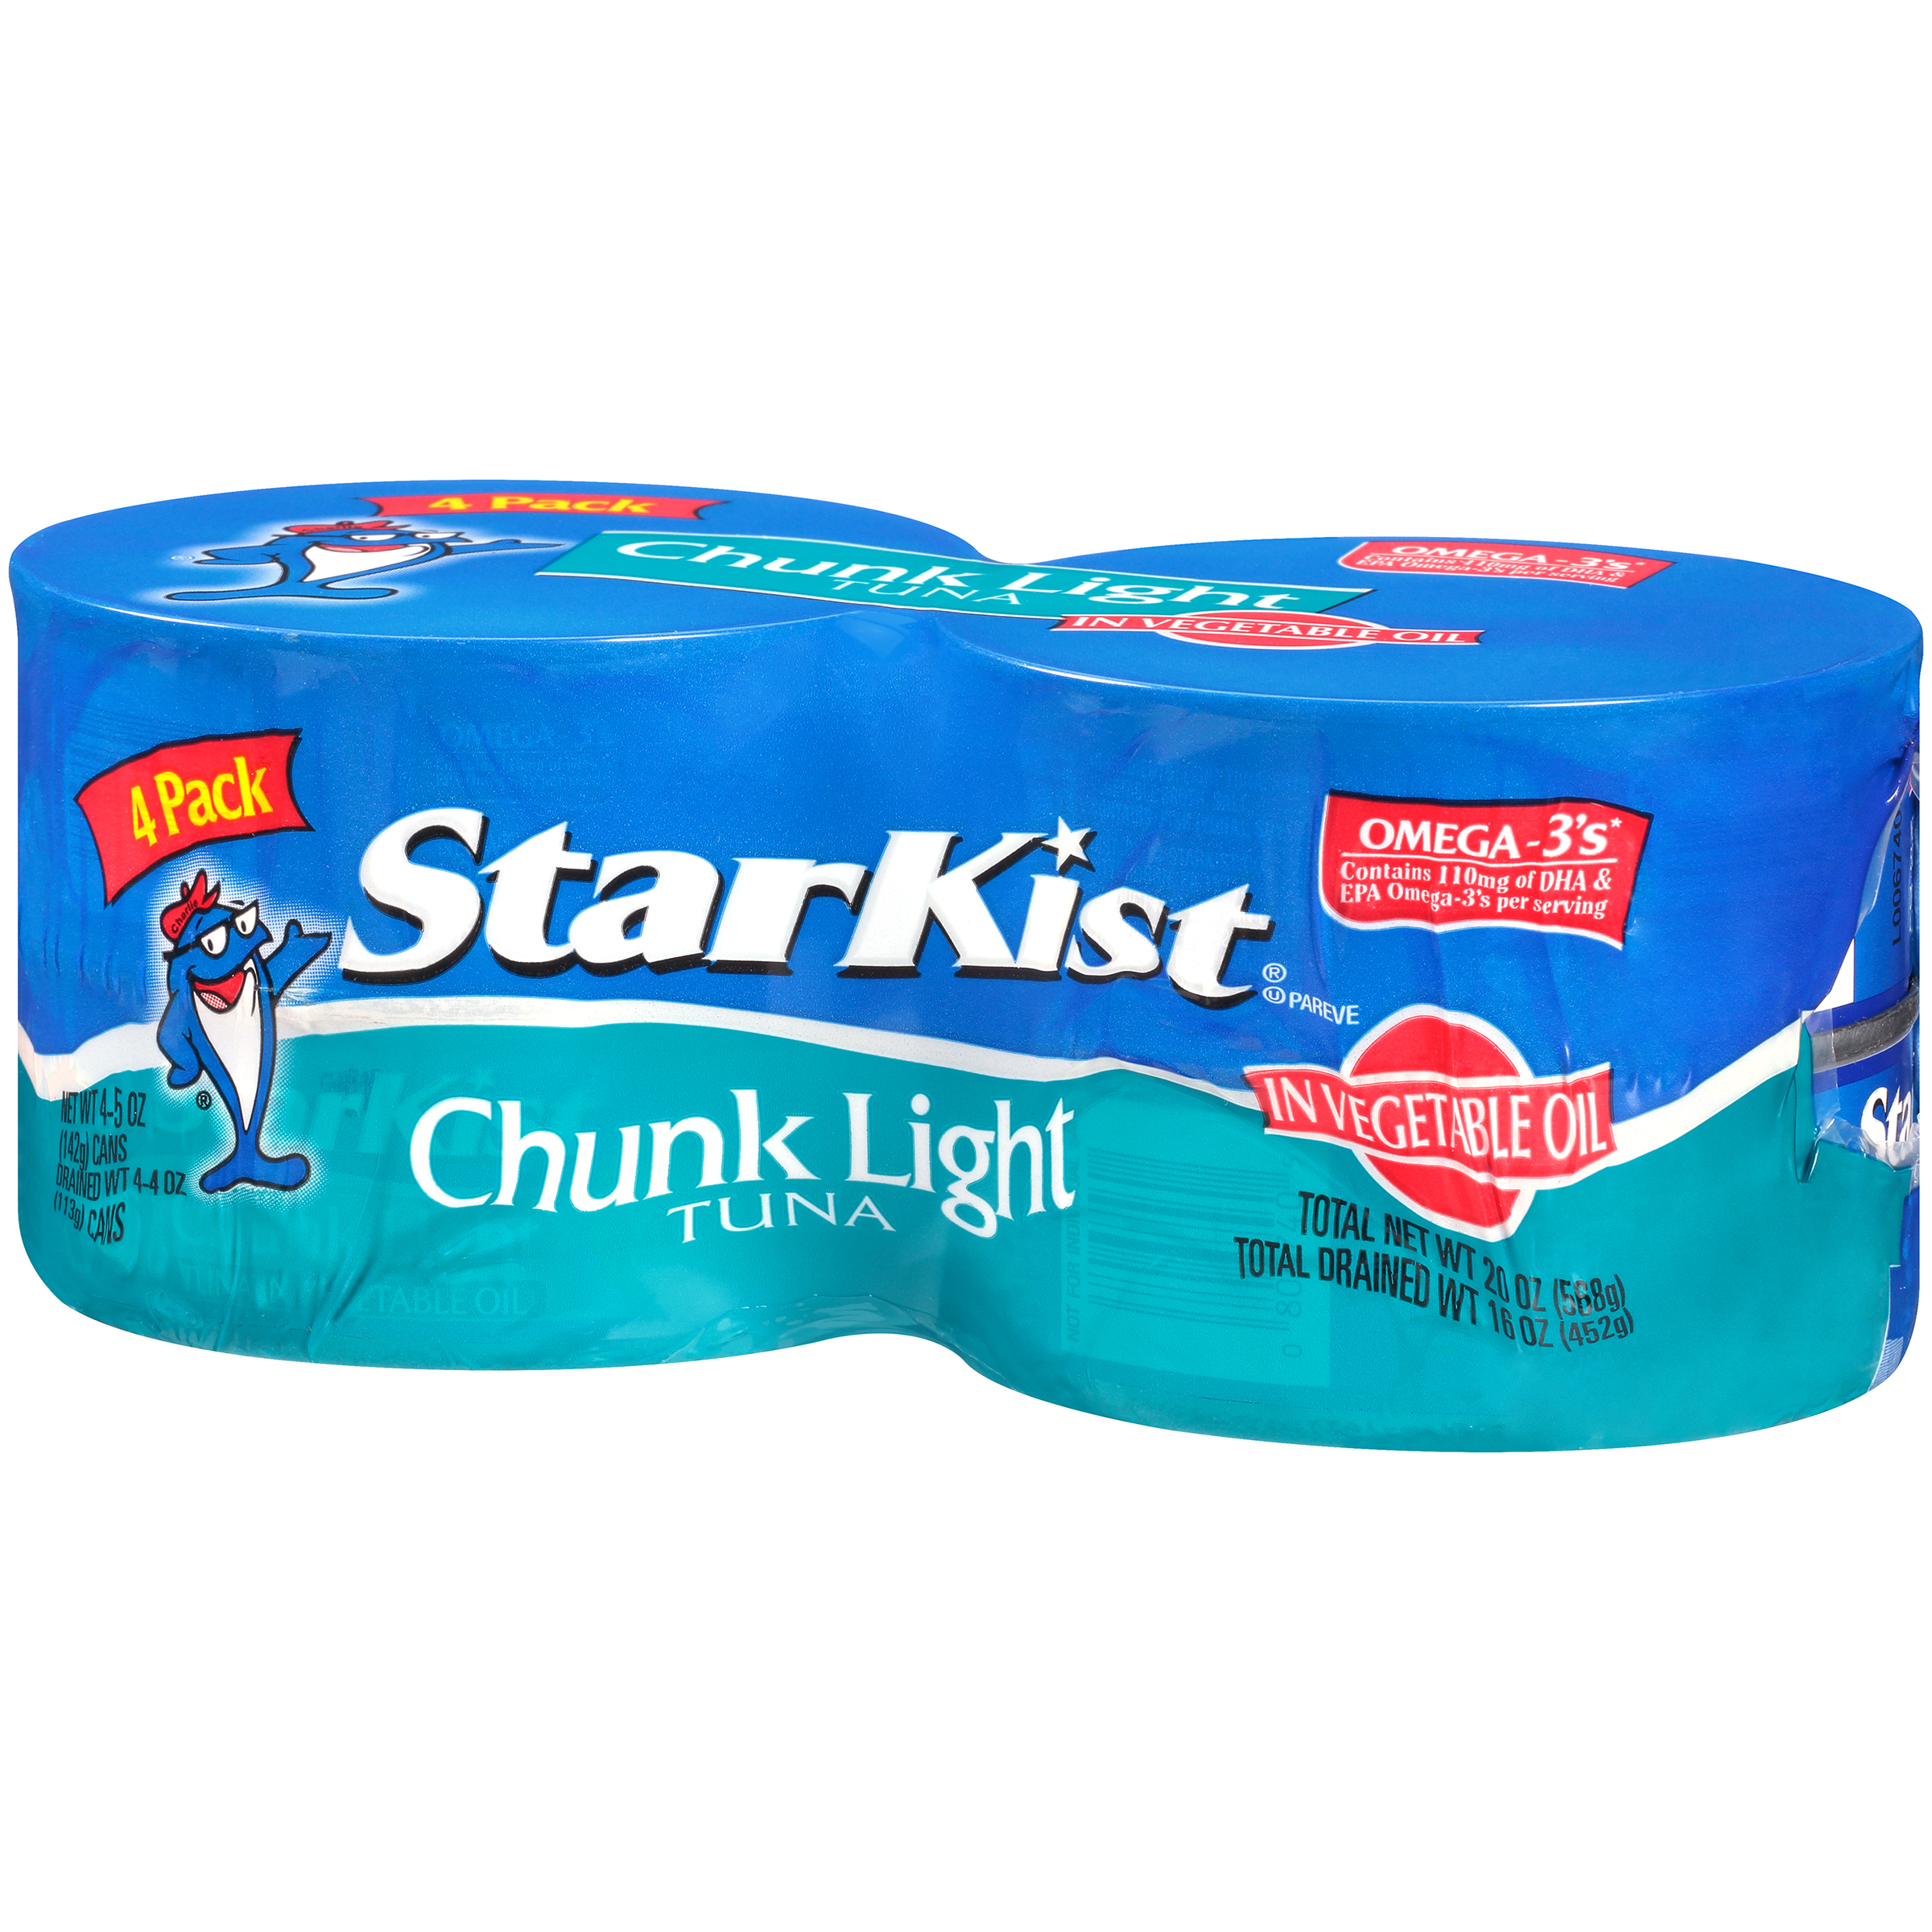 (4 Cans) StarKist Chunk Light Tuna in Vegetable Oil, 5 oz - image 2 of 4